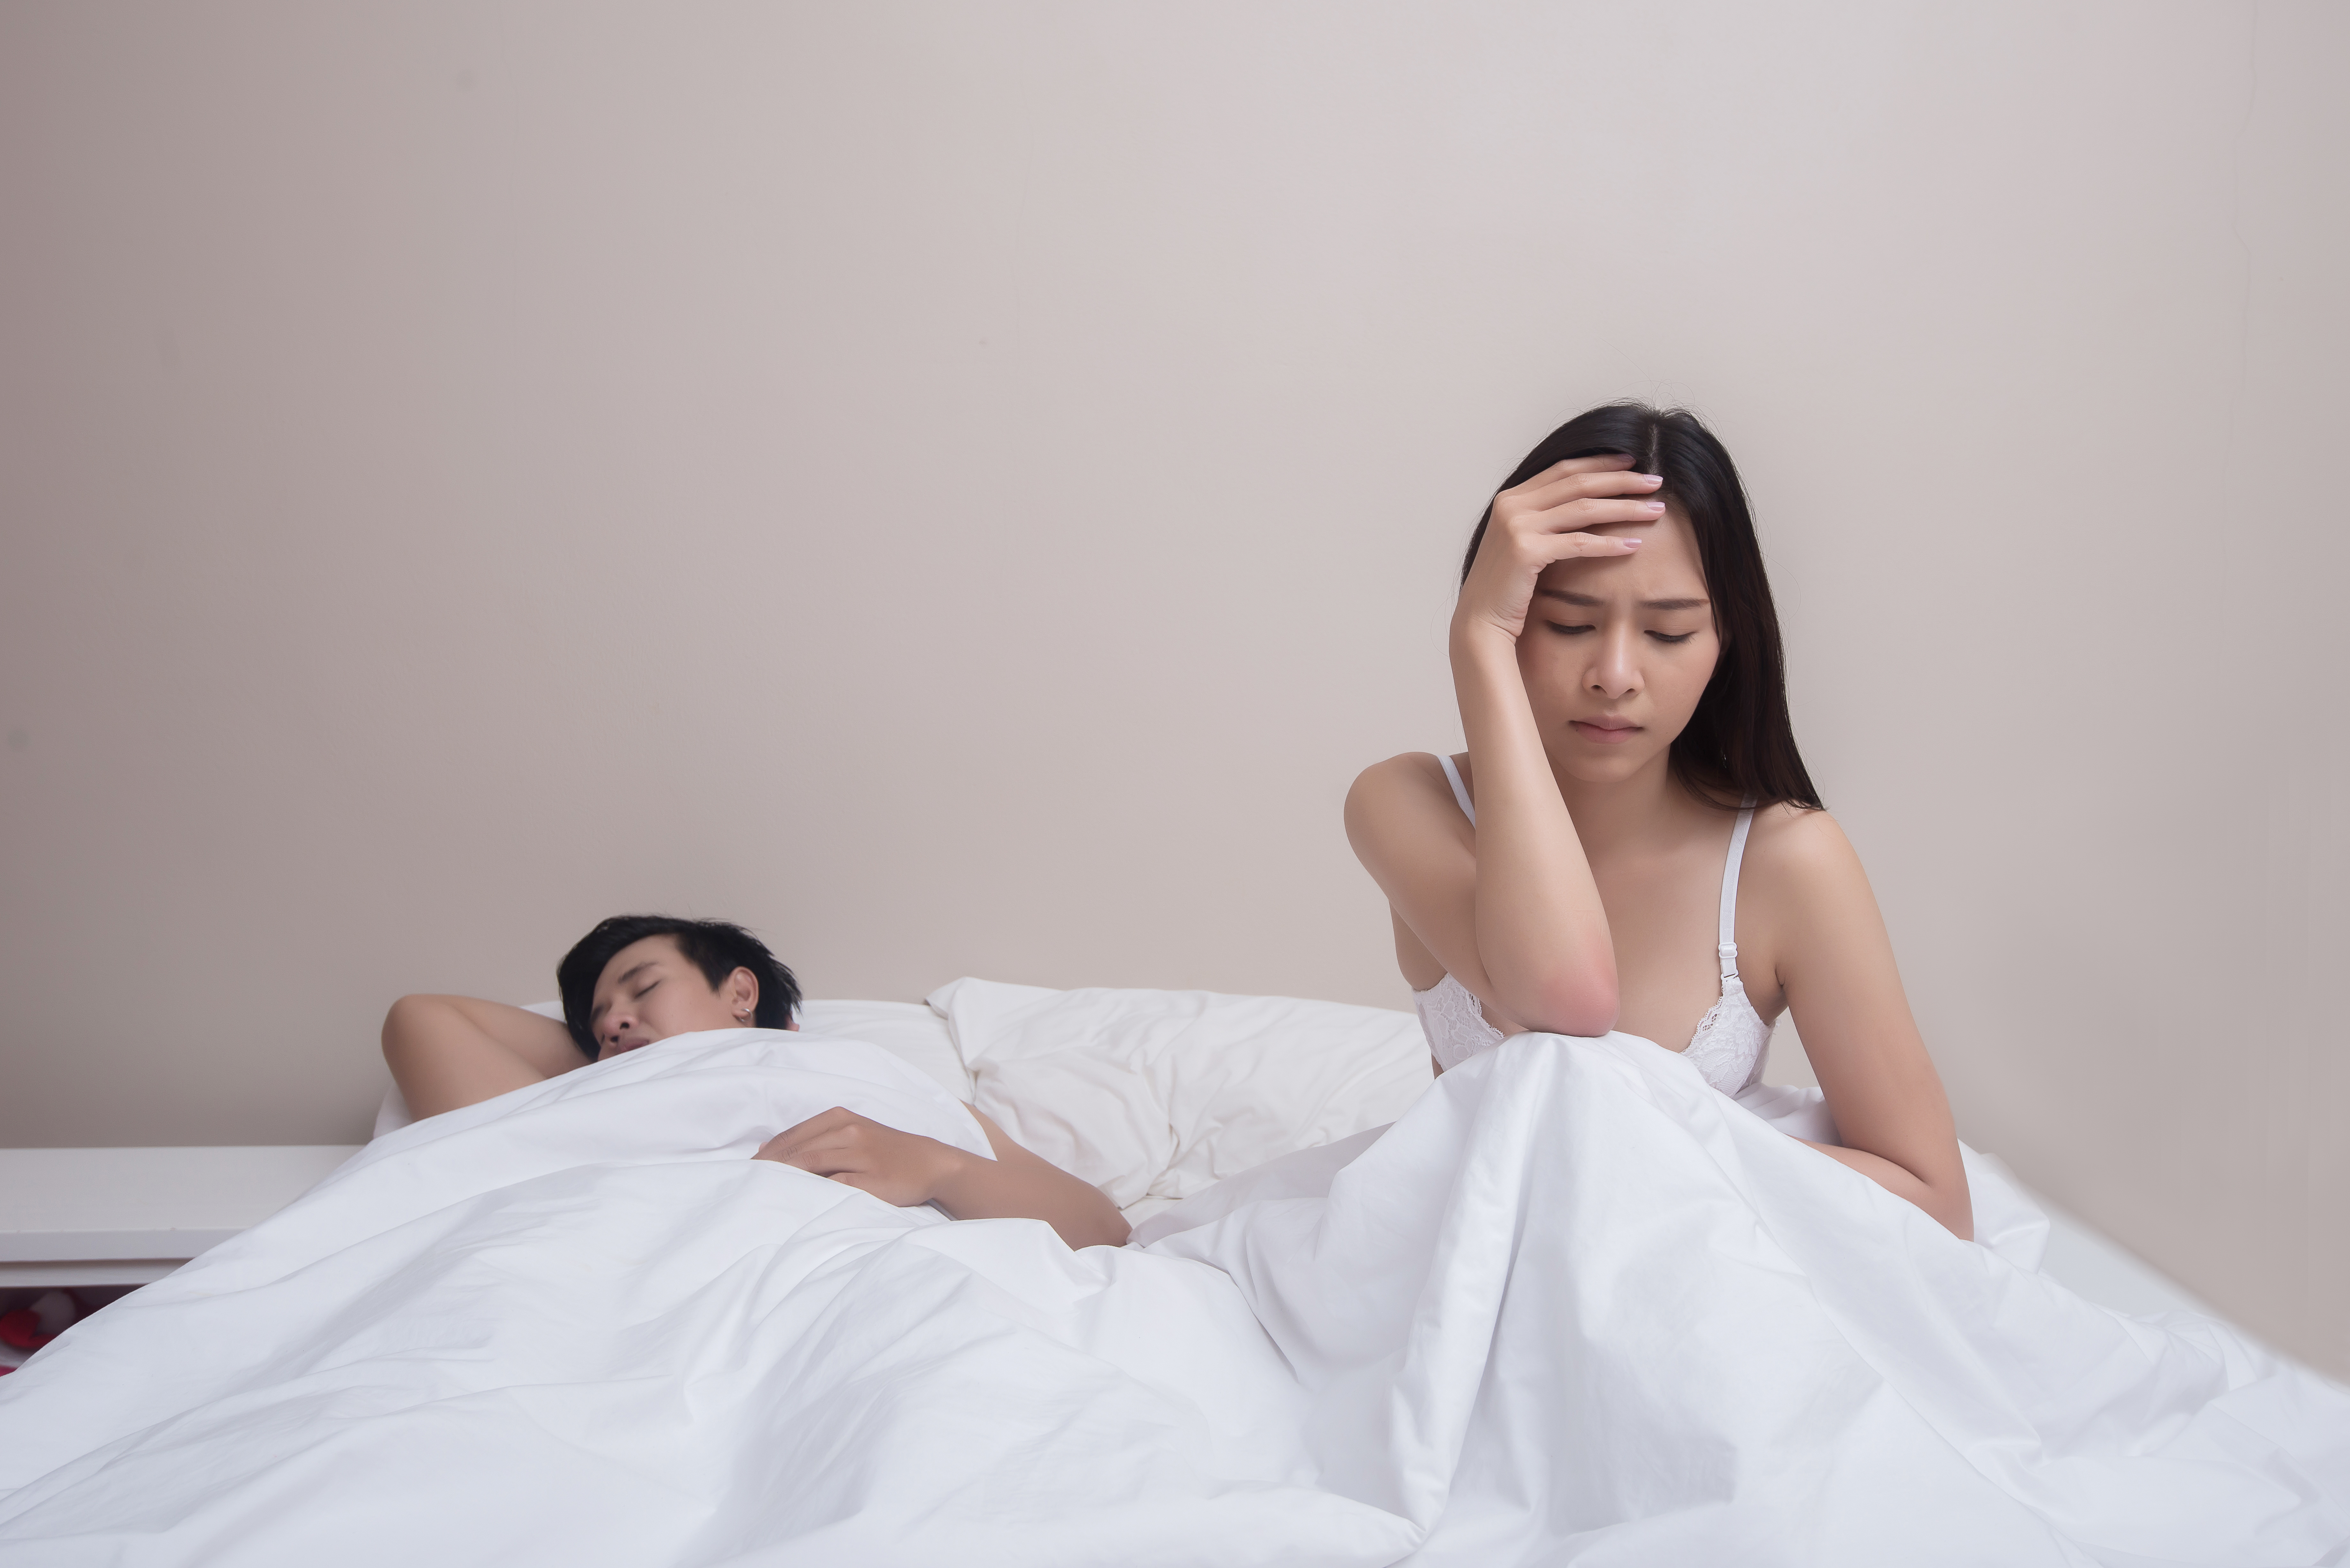 Nonconsensual Anal Sex - Is It Non-consensual To Wake Up Your Partner With Oral Sex ...